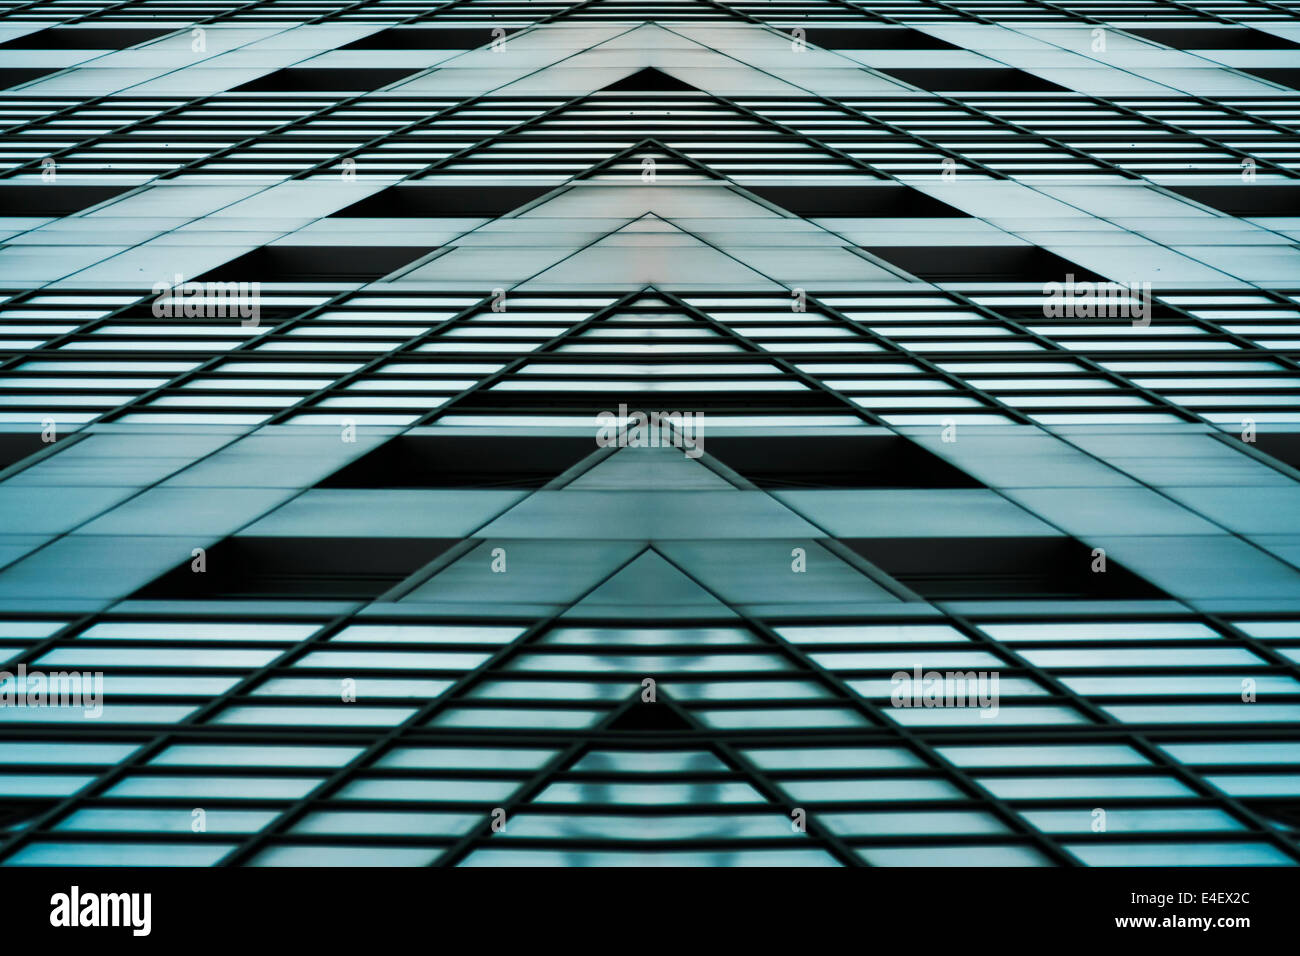 Abstract exterior space. Futuristic architecture. Stock Photo